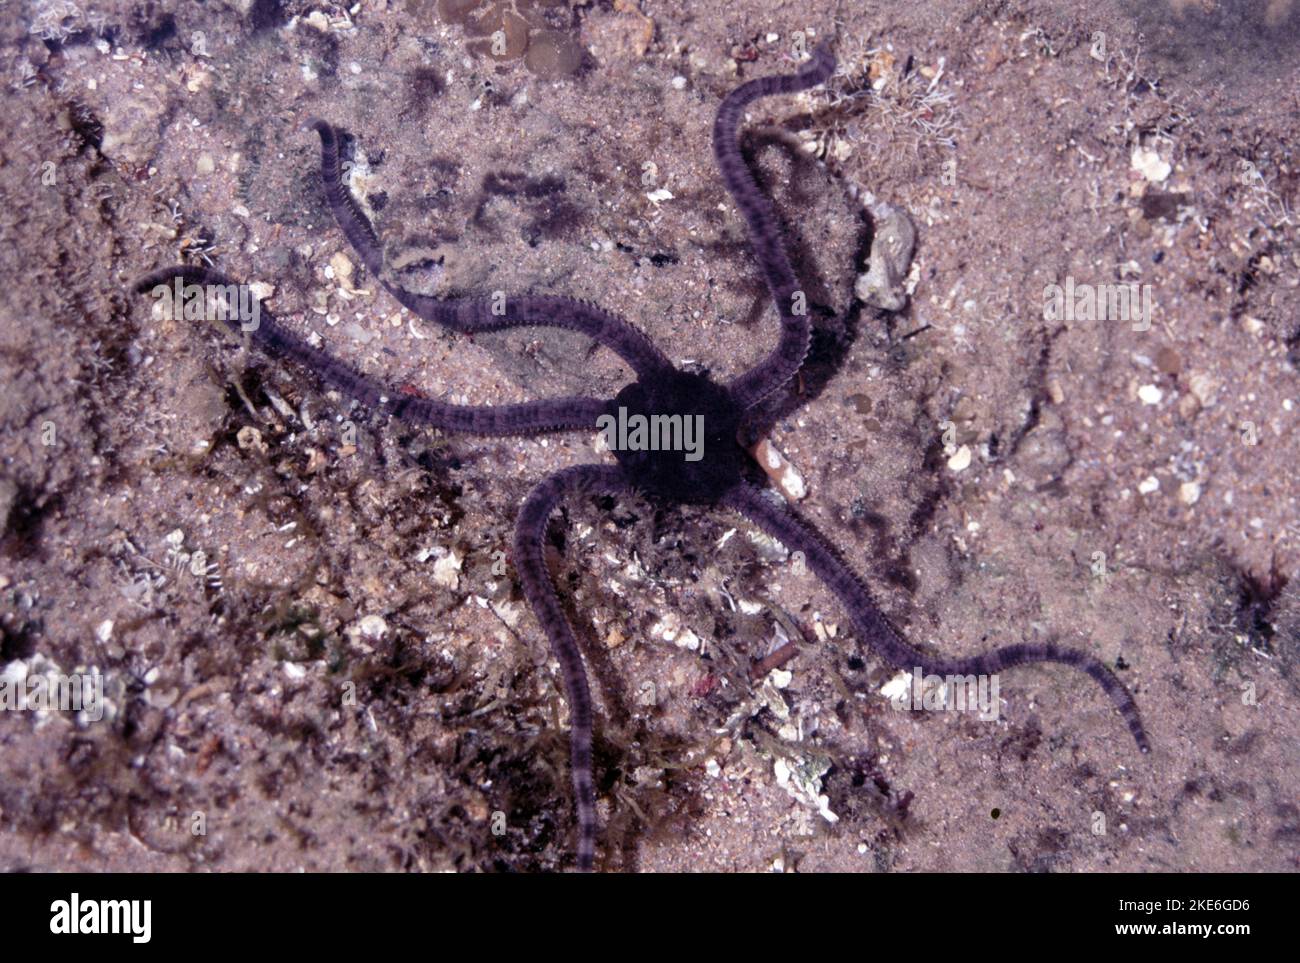 Ophiocomina nigra, commonly known as the black brittle star or black serpent star, is a species of marine invertebrate in the order Ophiurida Stock Photo